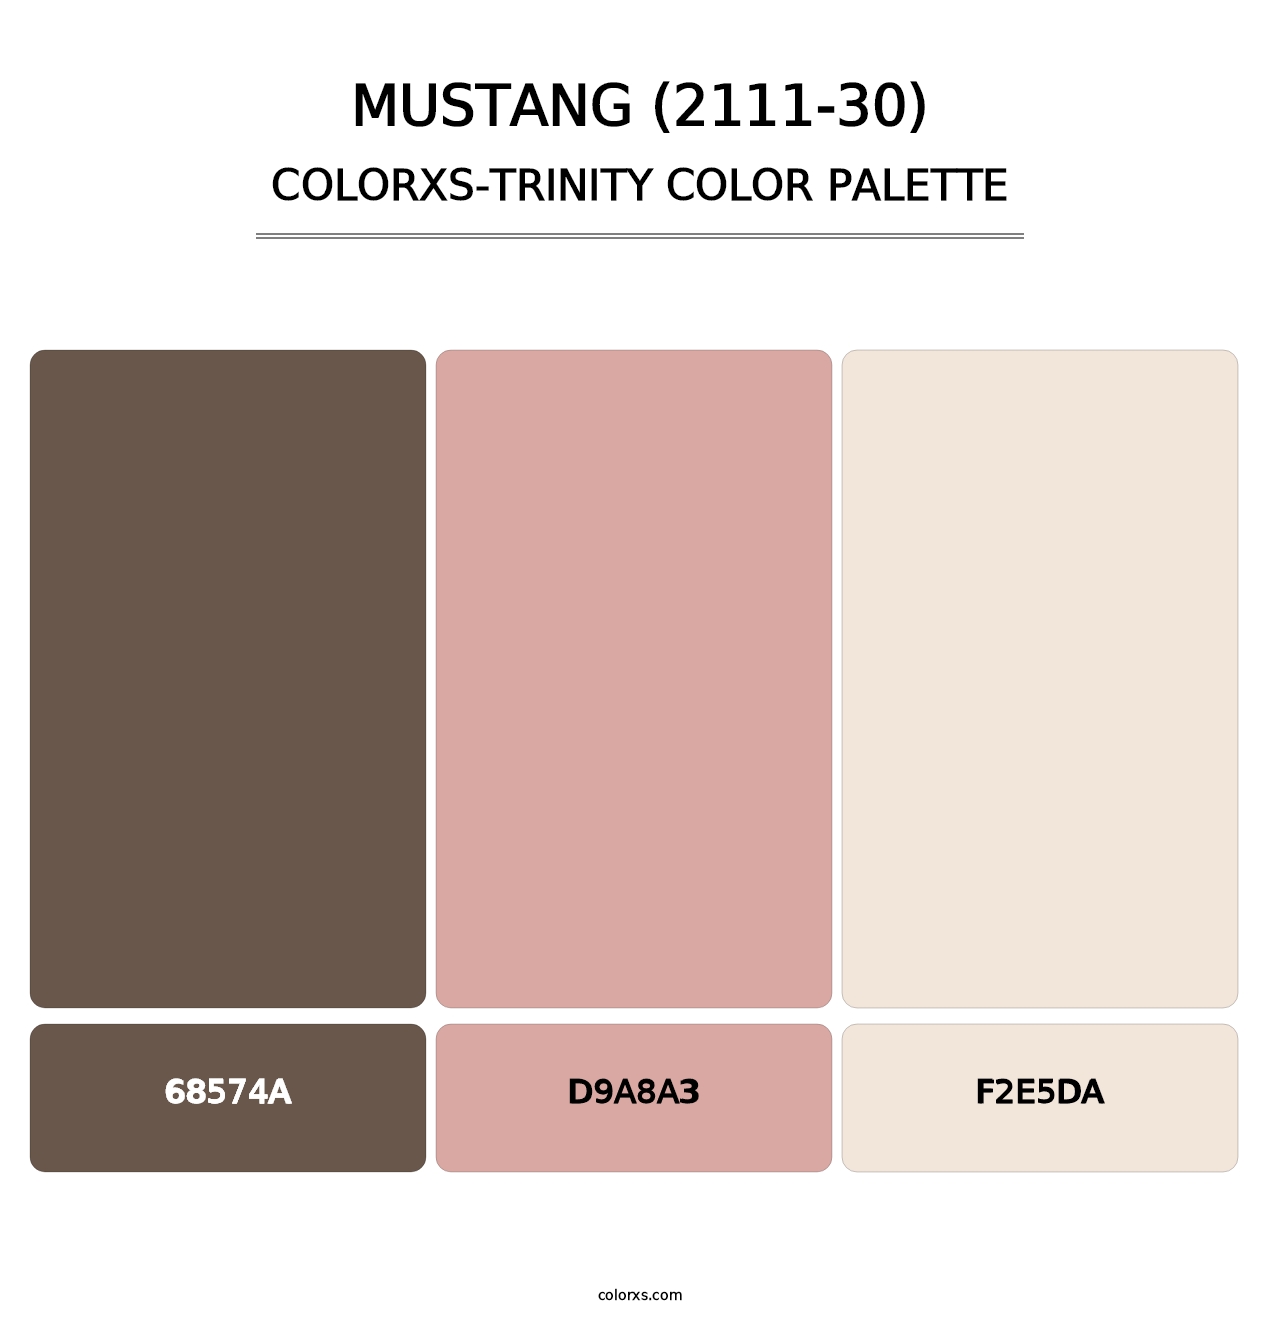 Mustang (2111-30) - Colorxs Trinity Palette